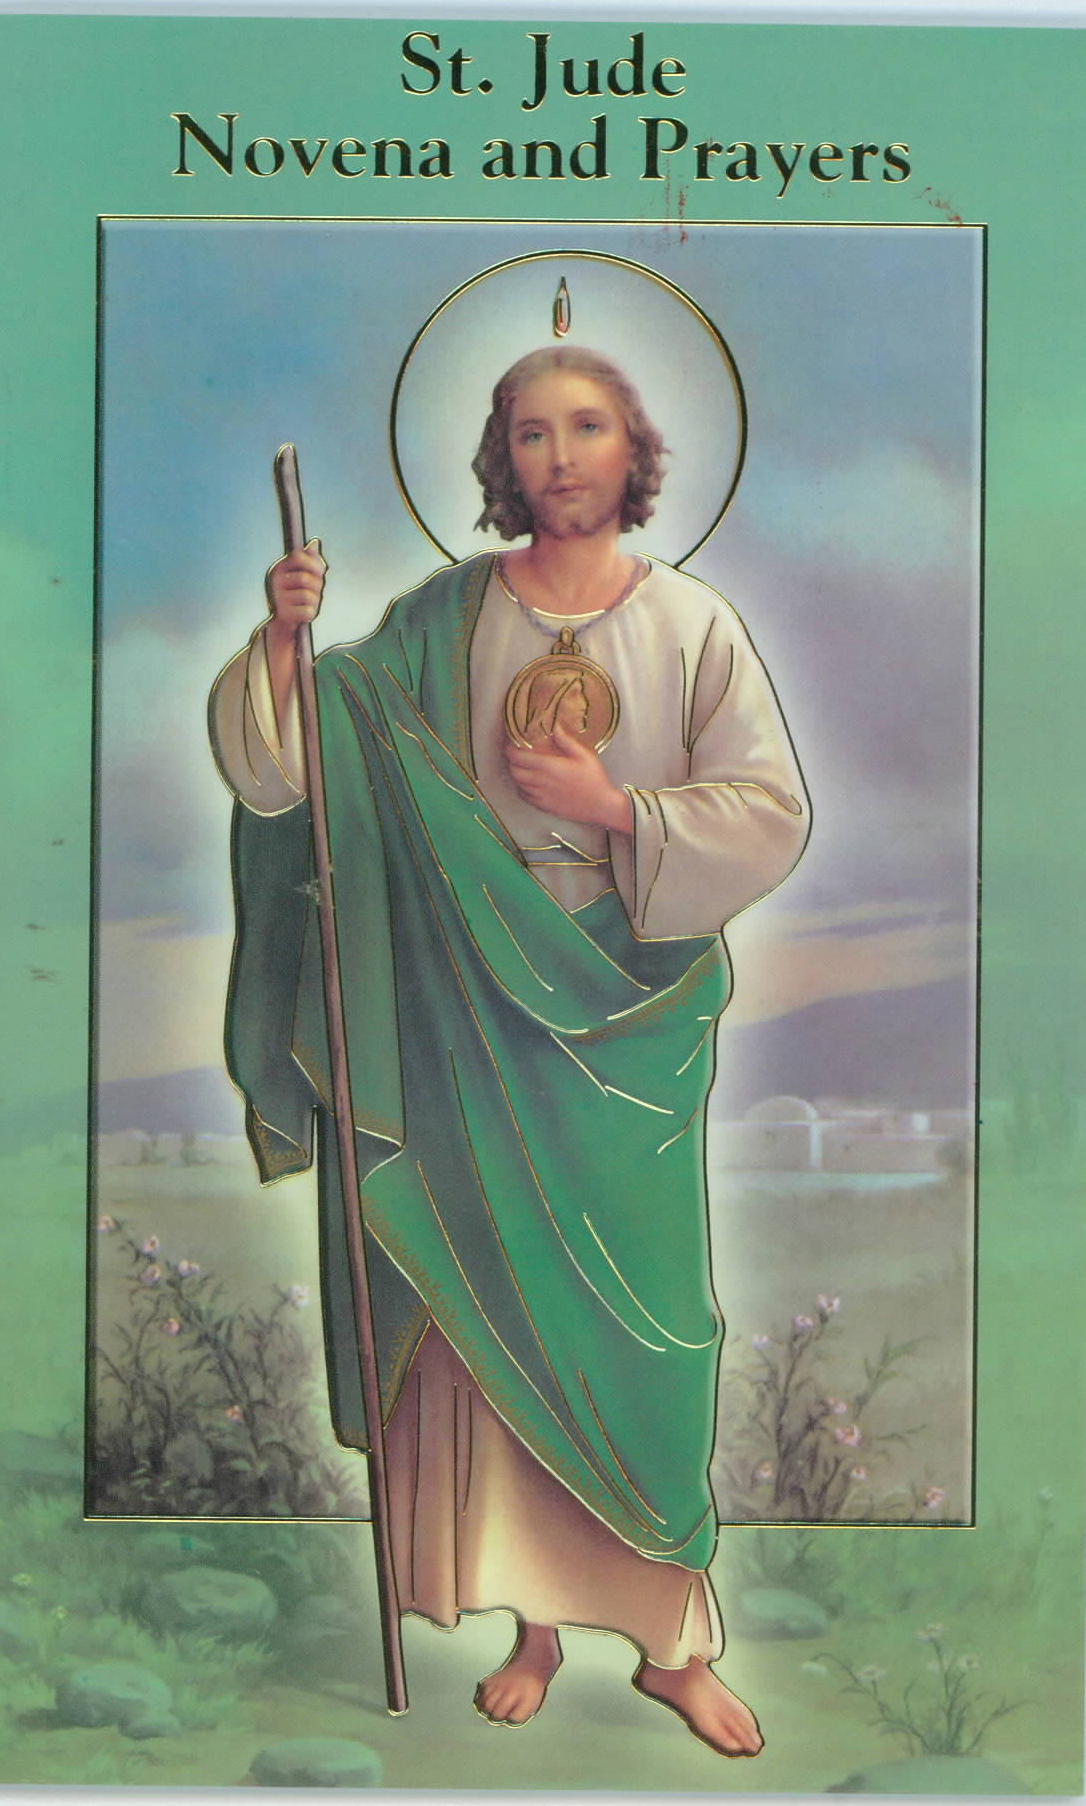 St. Jude Novena and Prayers Book 12-2432-320 is 3.75" x 5-7/8" and 24 pages beautifully illustrated with Italian Fratelli-Bonella Artwork and origianl text by Daniel A. Lord, S.J.